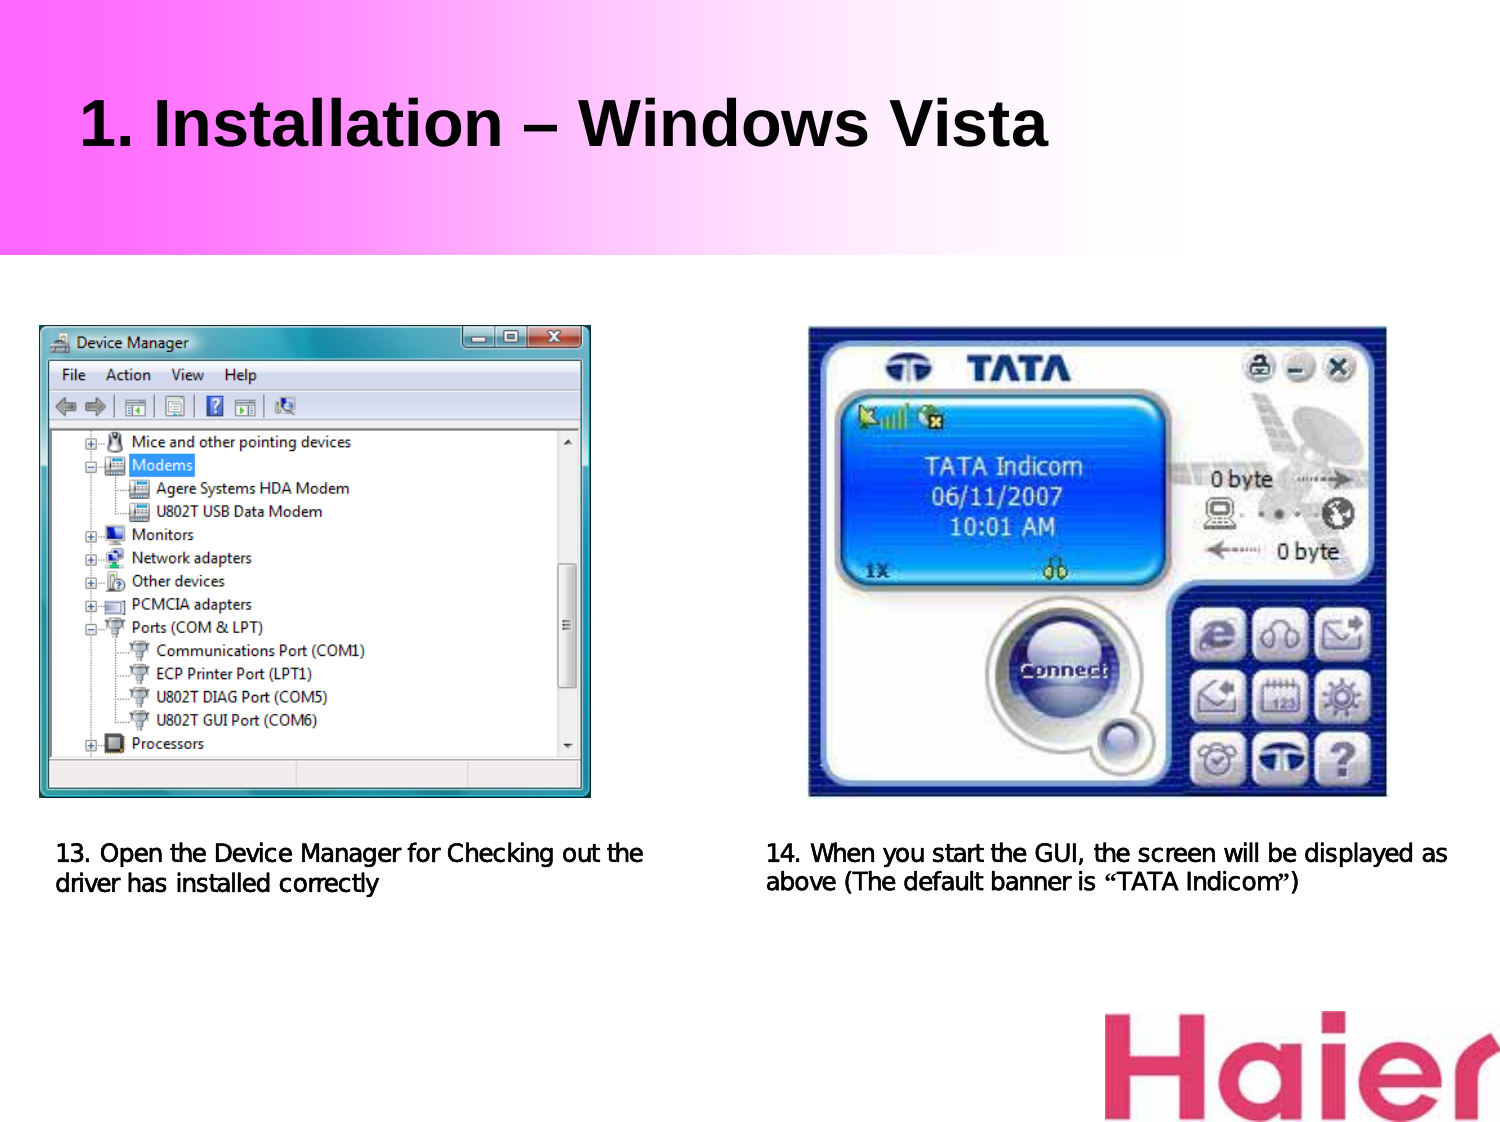 1. Installation – Windows Vista13. Open the Device Manager for Checking out the driver has installed correctly 14. When you start the GUI, the screen will be displayed as above (The default banner is “TATA Indicom”)